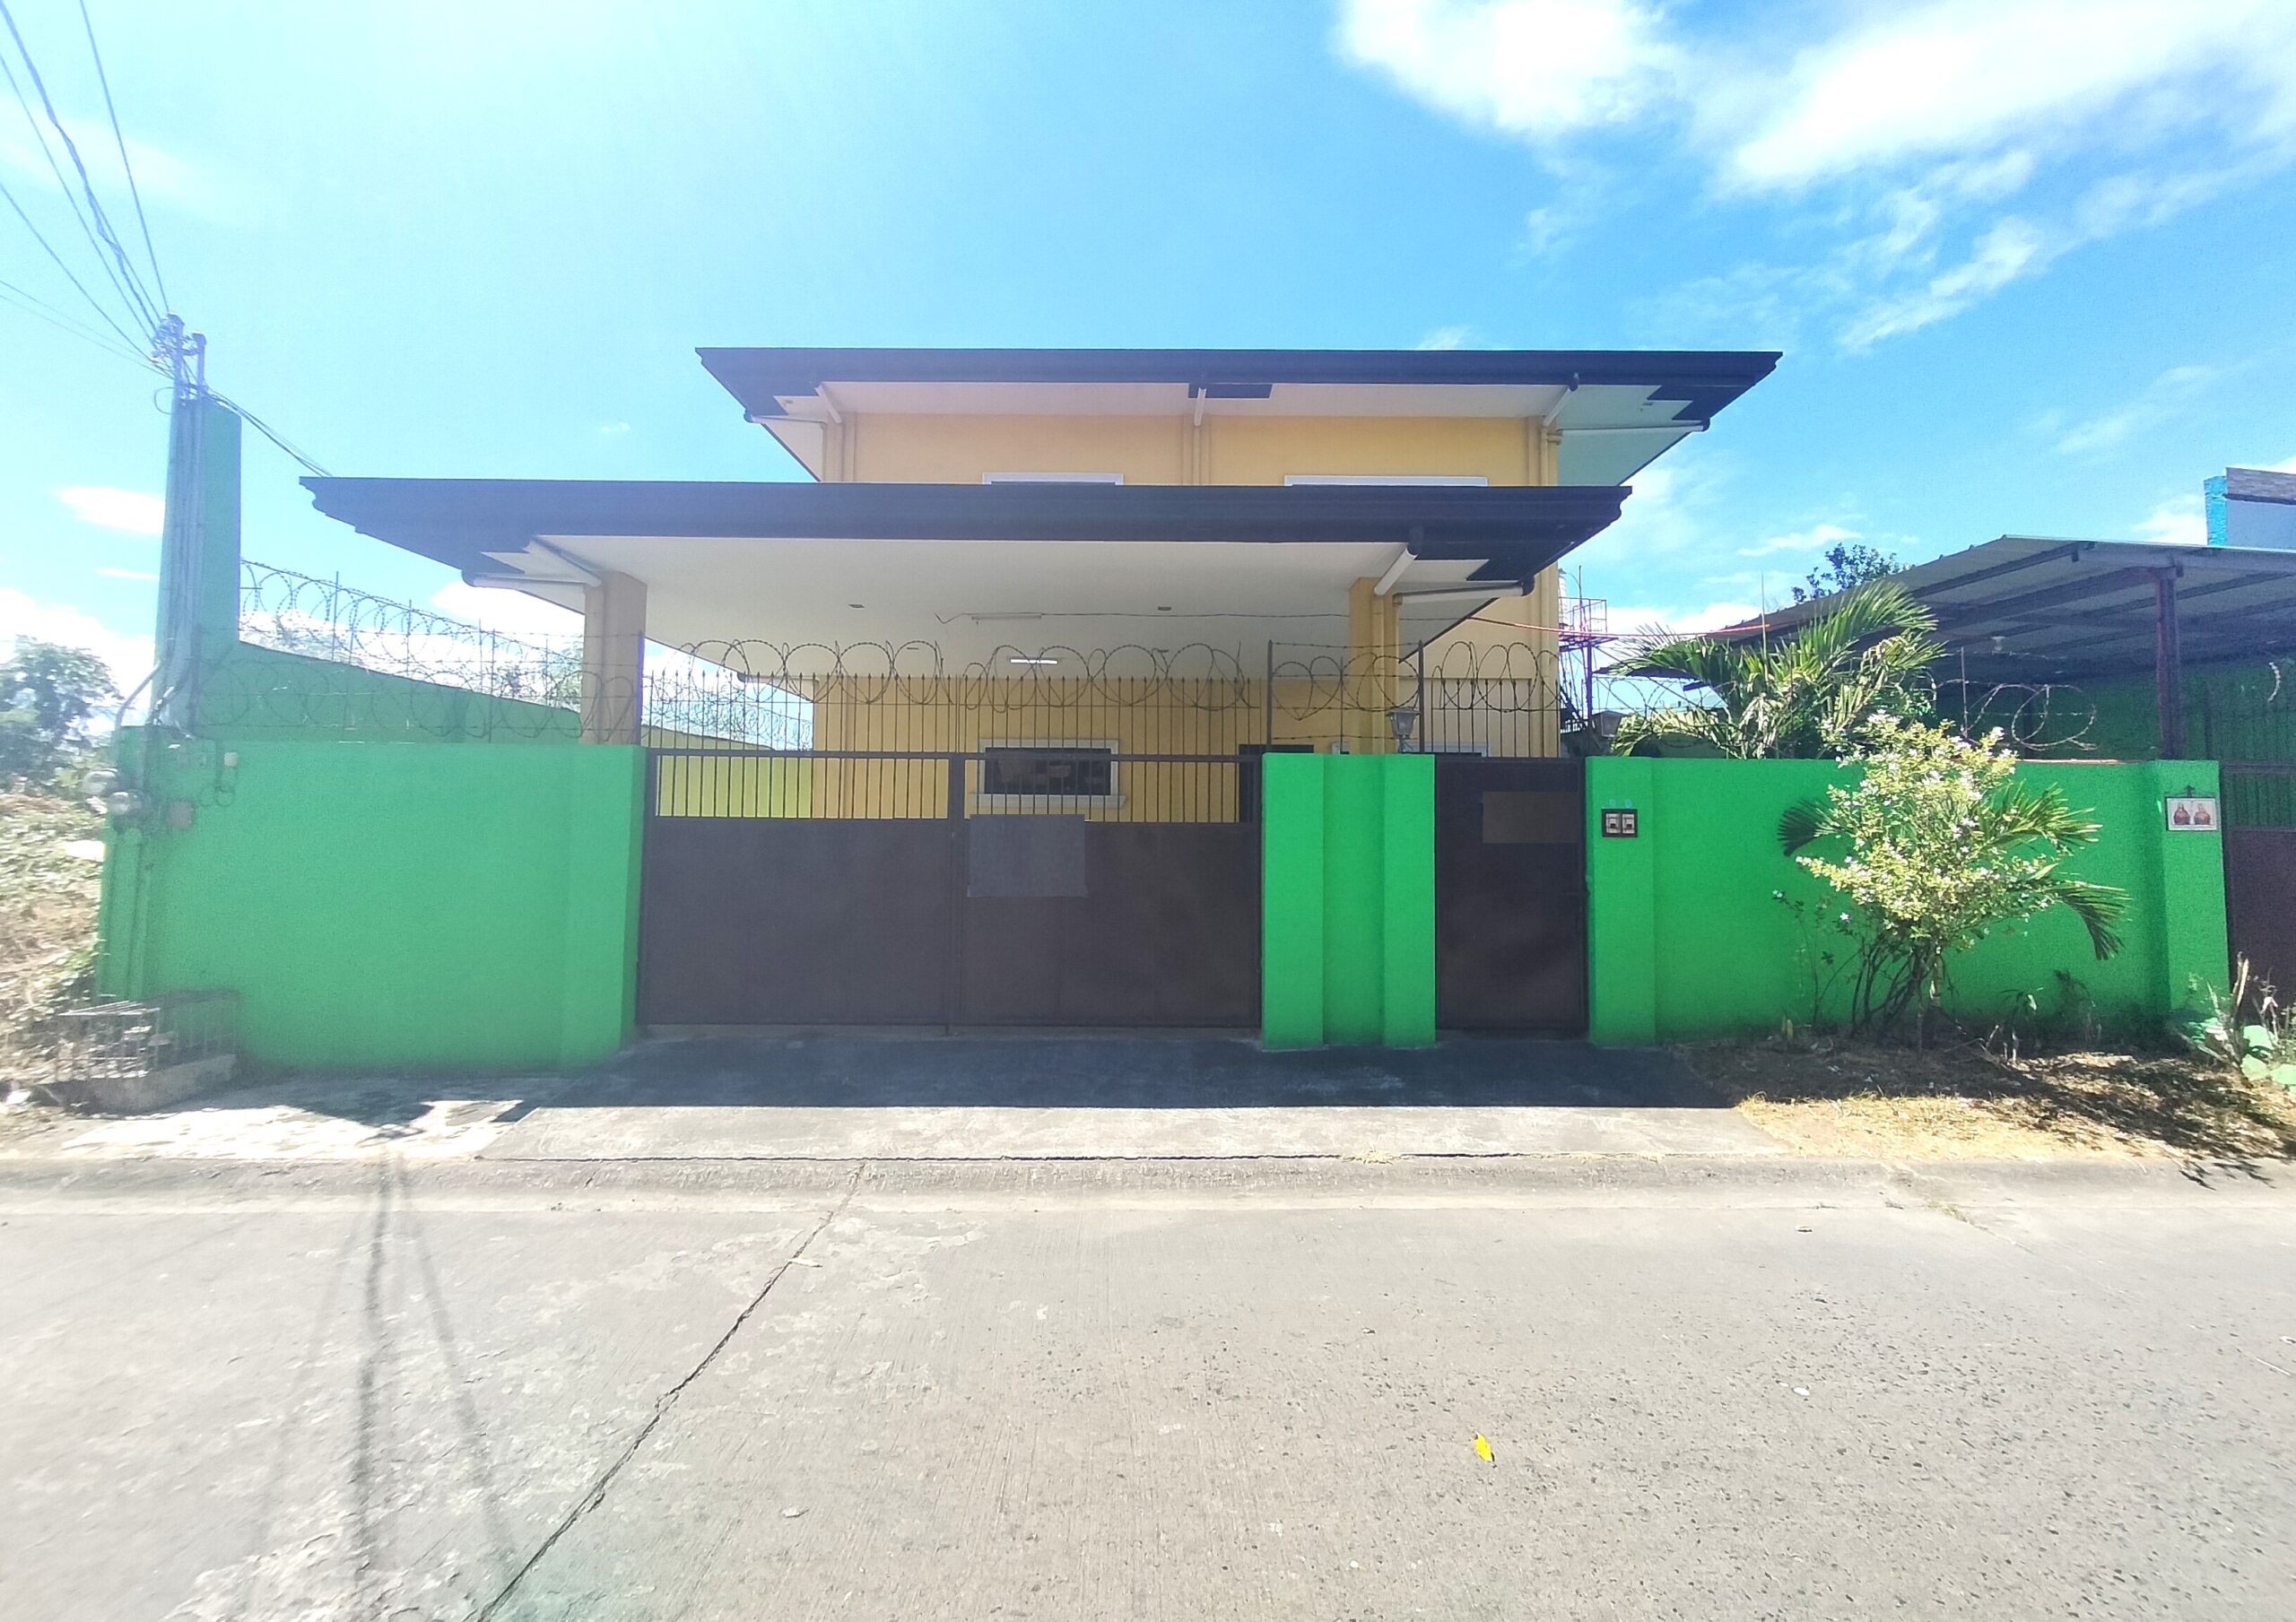 House for Rent in Bf Homes, Las Pinas